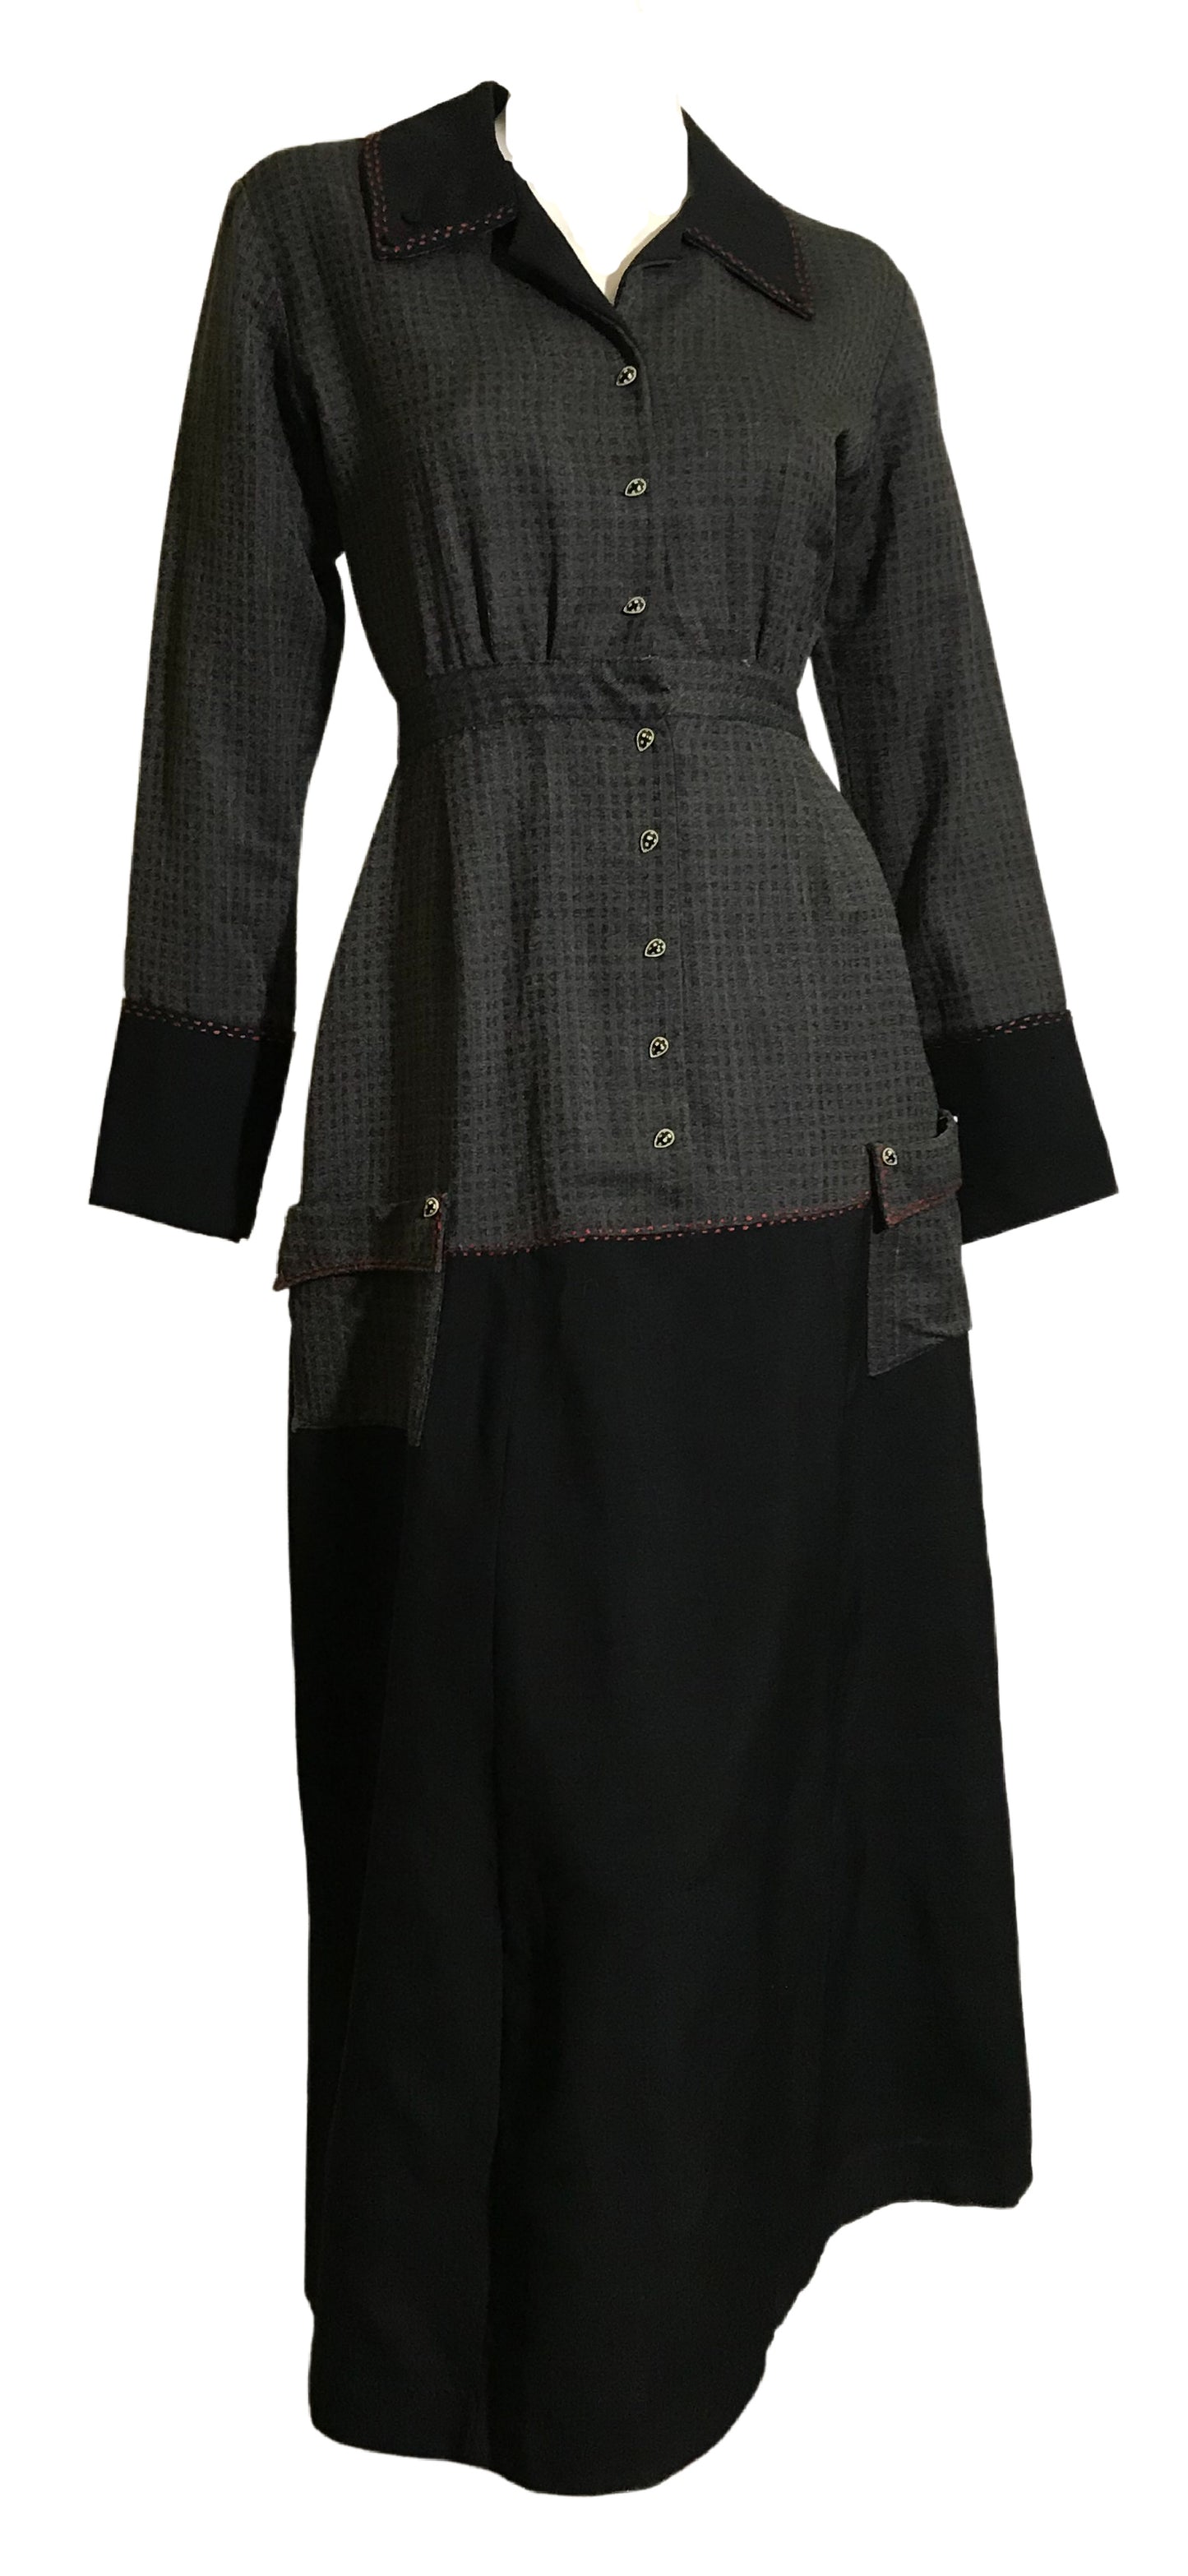 Black and Grey Wool Edwardian Dress with Red Accents Porcelain Buttons circa 1910s